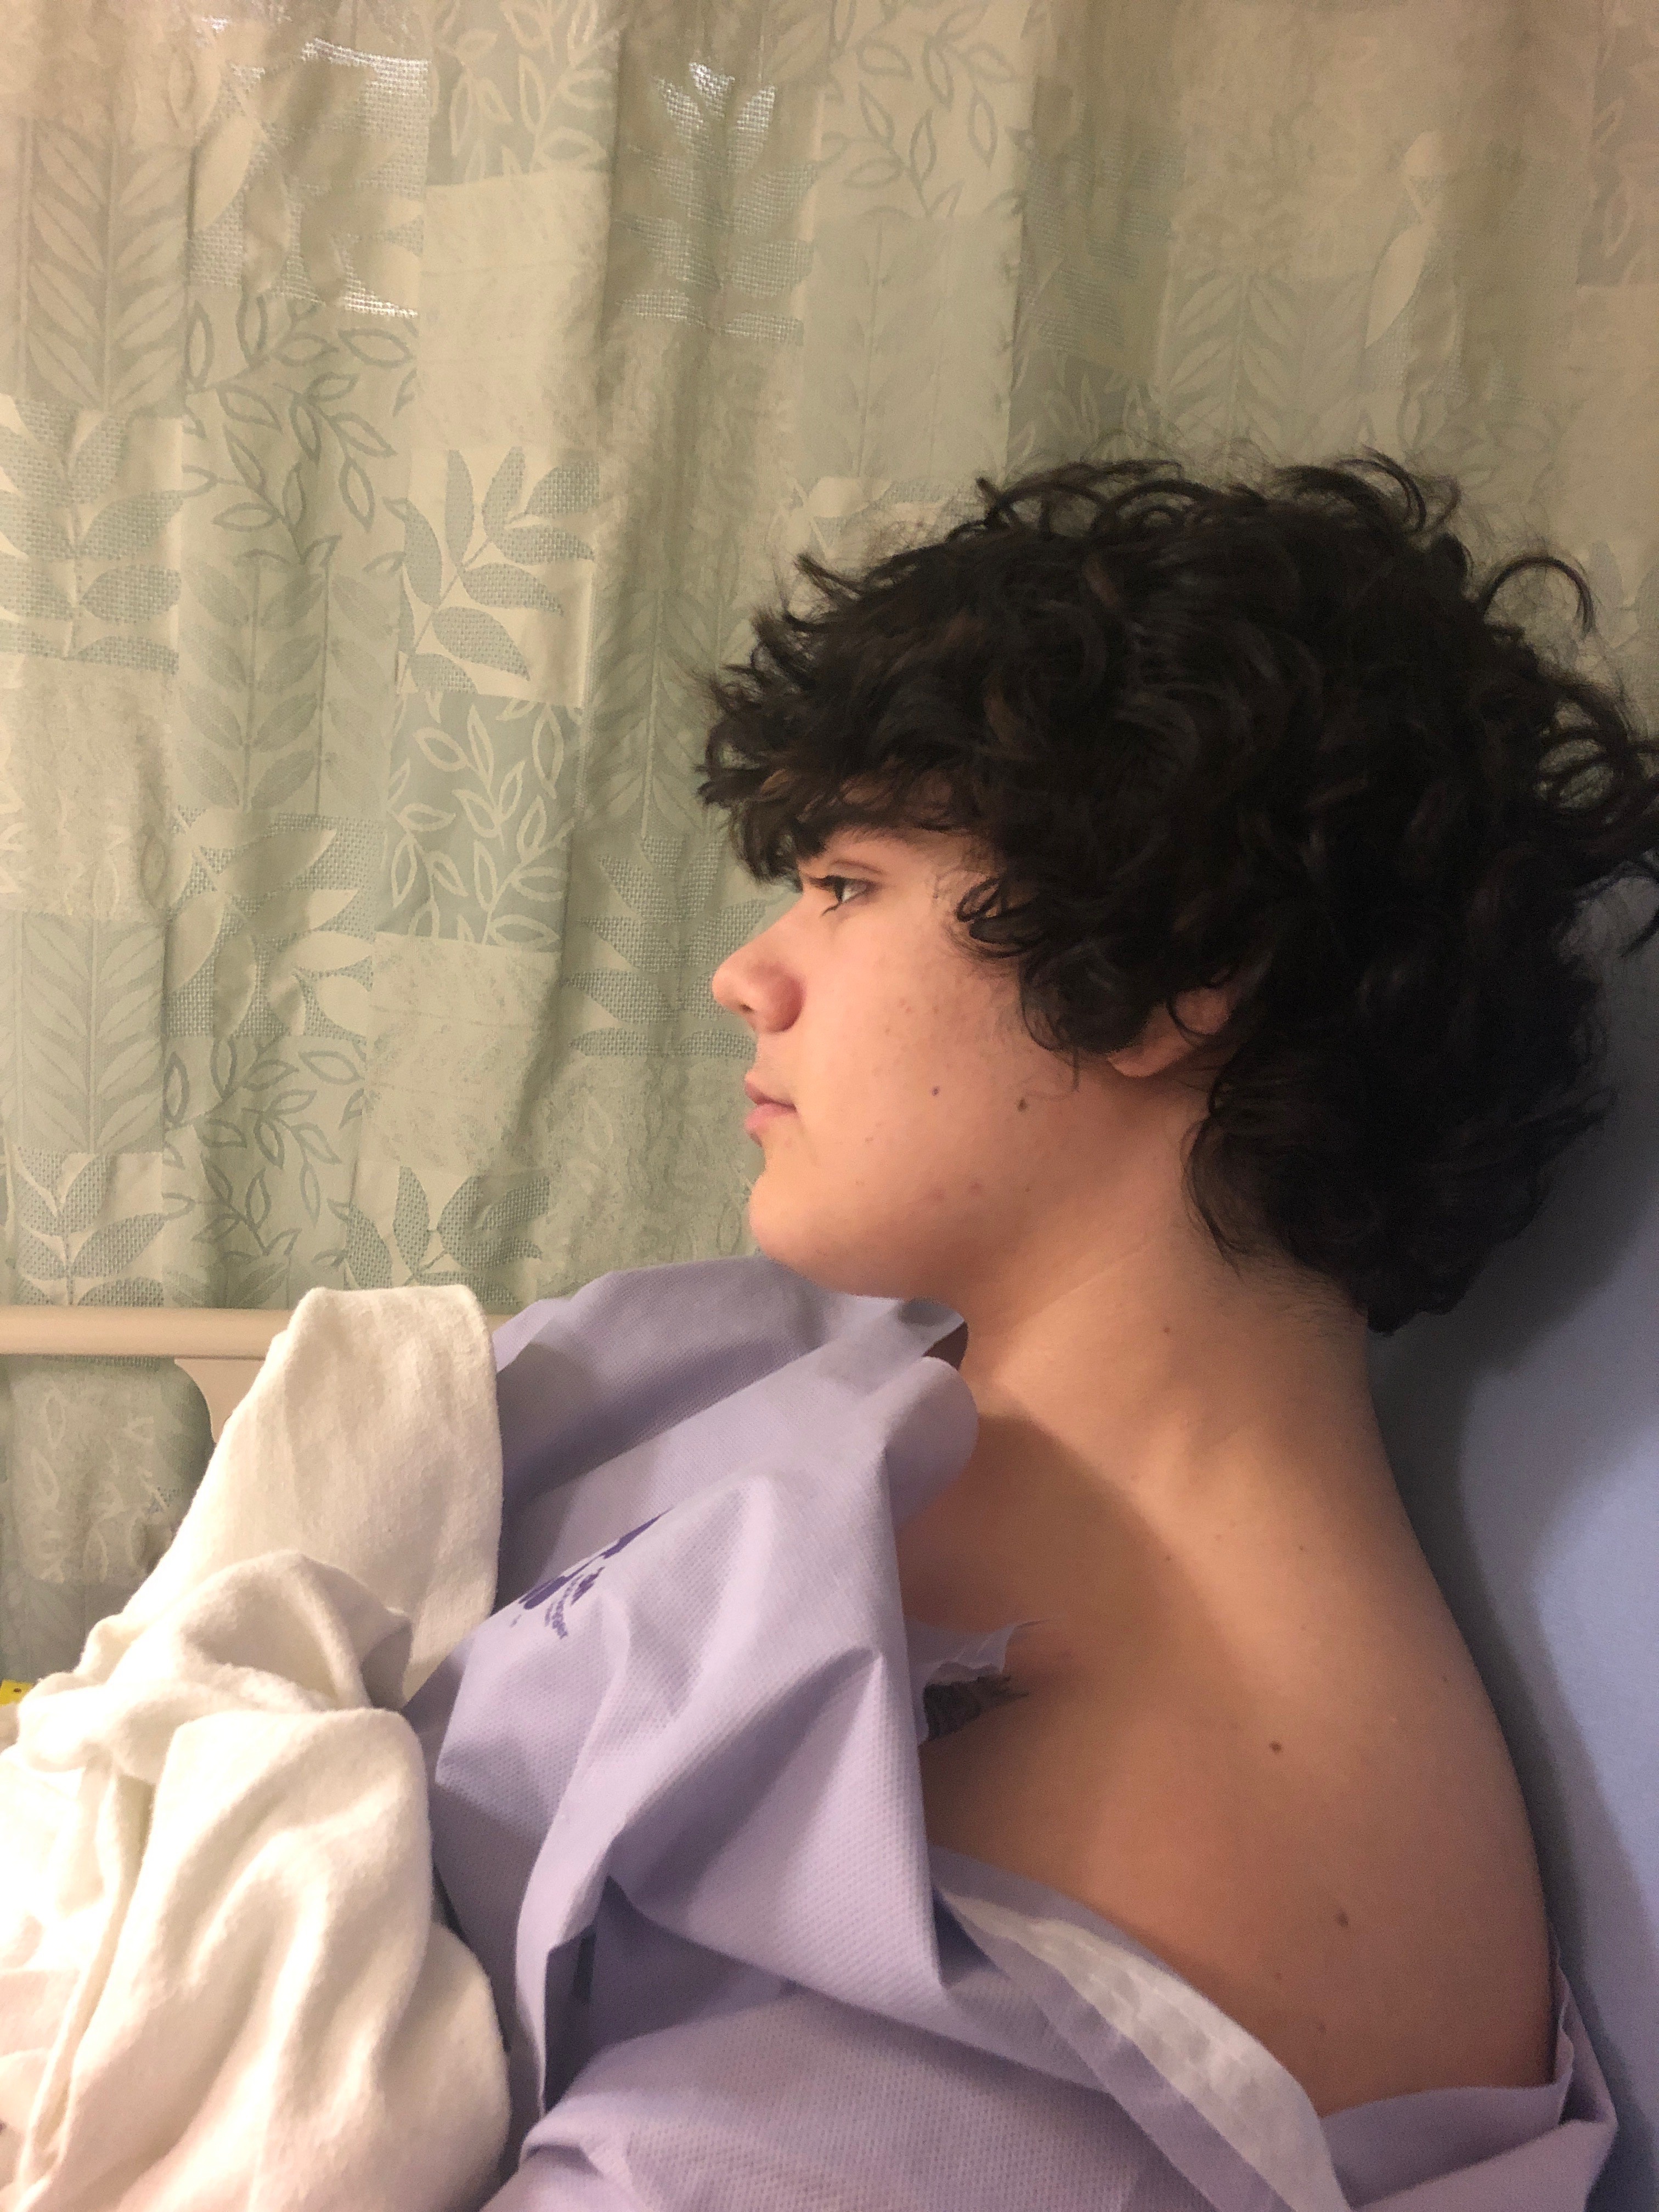 profile view of a teen boy in a hospital gown in a hospital bed